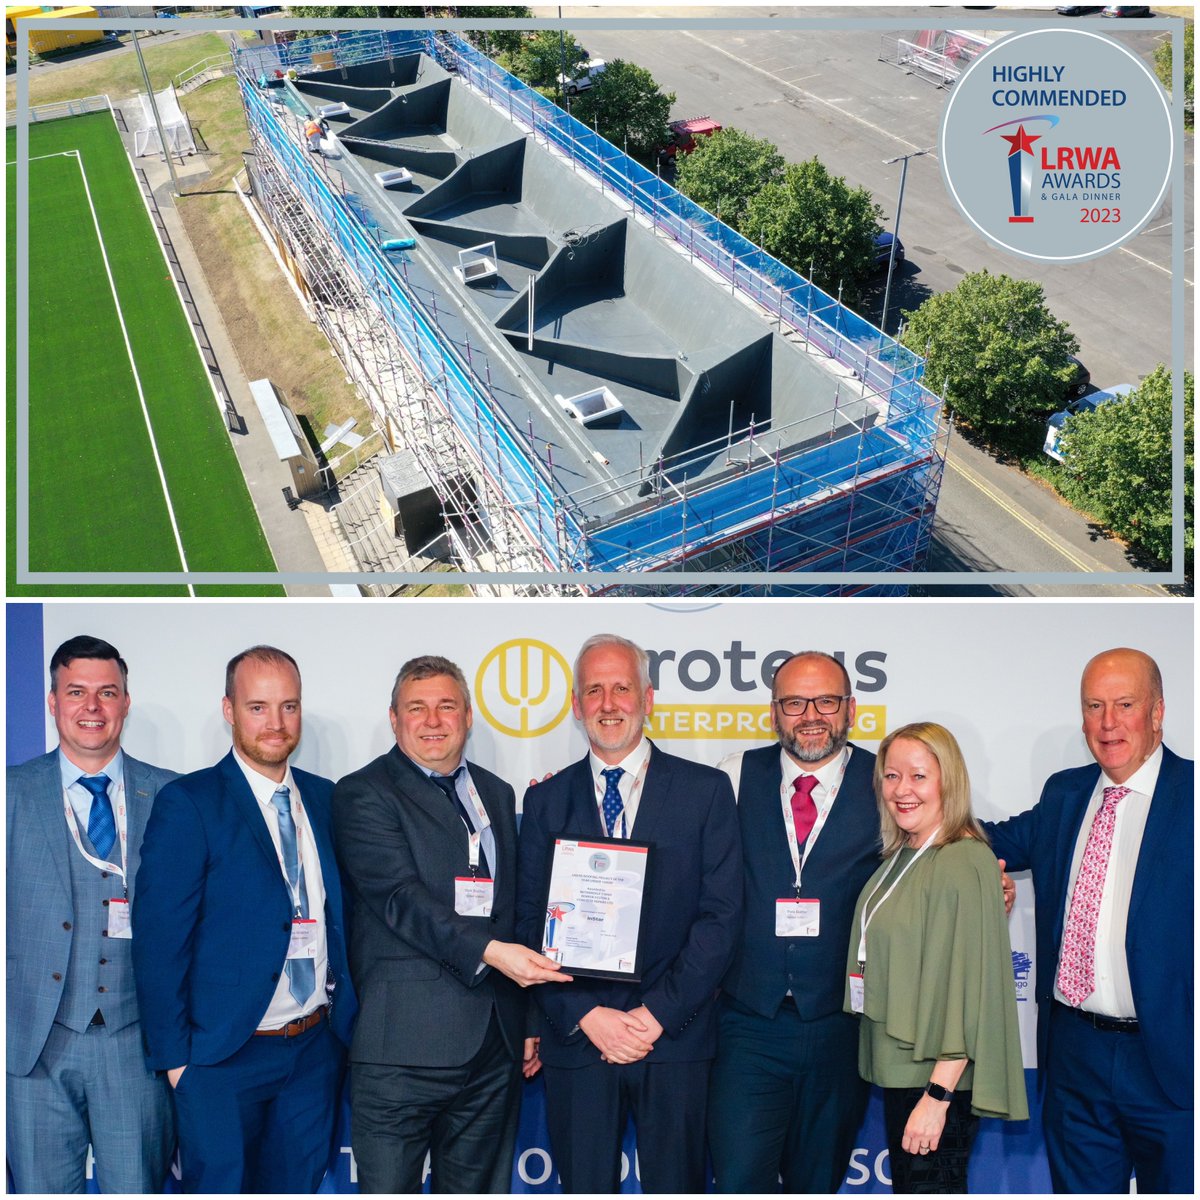 LRWA Awards 2023 - Winners Week!🏆

The ‘Highly Commended’ award for the Liquid #Roofing Project Of The Year <1000㎡ was awarded to Netherdale Stand by @KemperSystemUK & Concrete Repairs.
Congratulations once again everyone!
#LRWAawards2023 #highlycommended #waterproofing